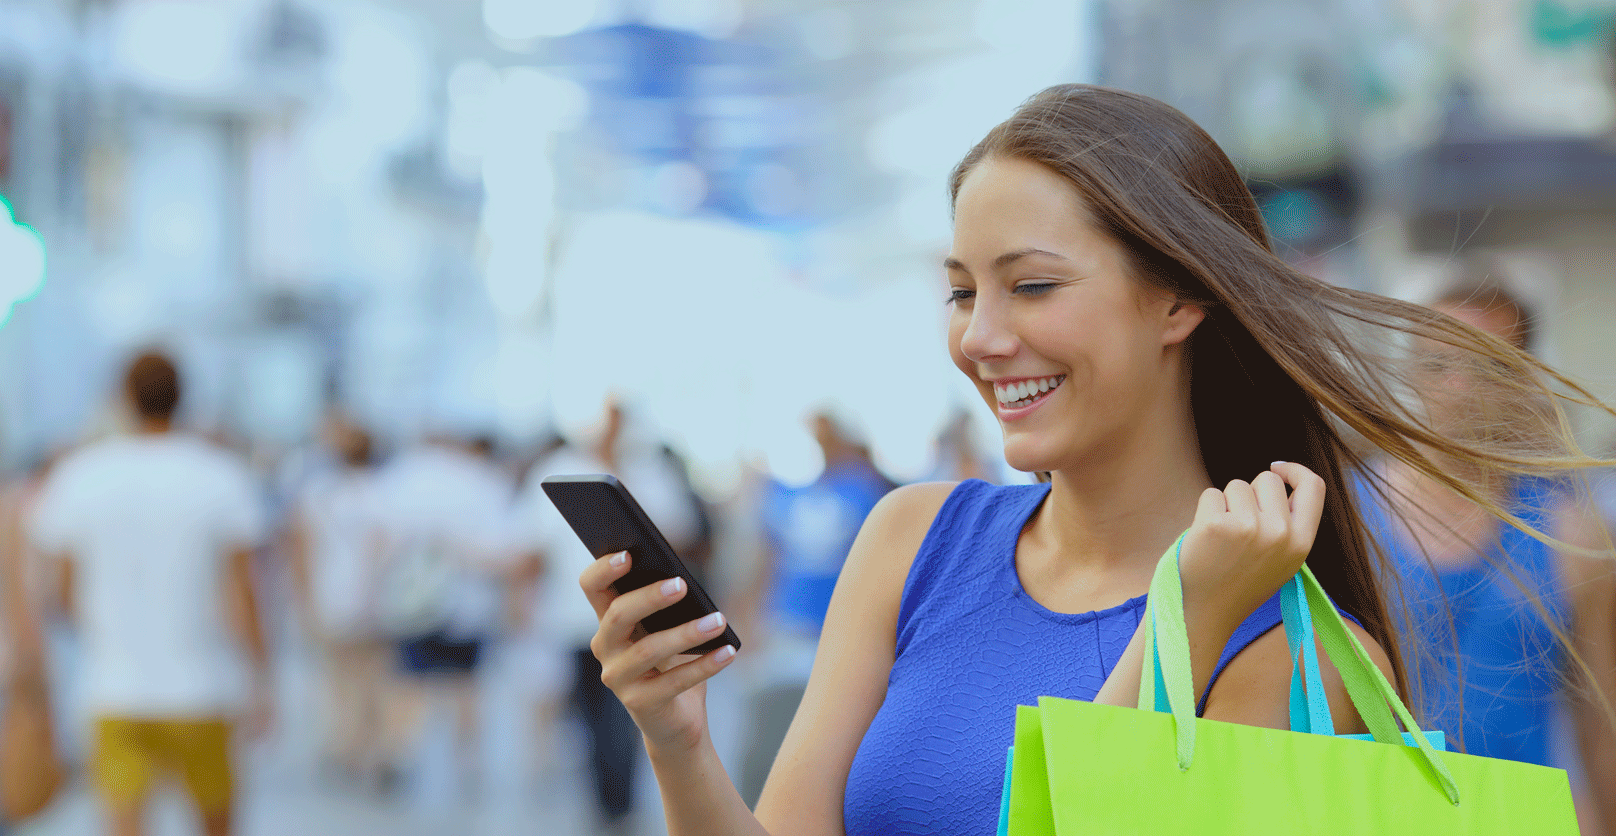 Shopping And Scrolling Go Hand-in-hand